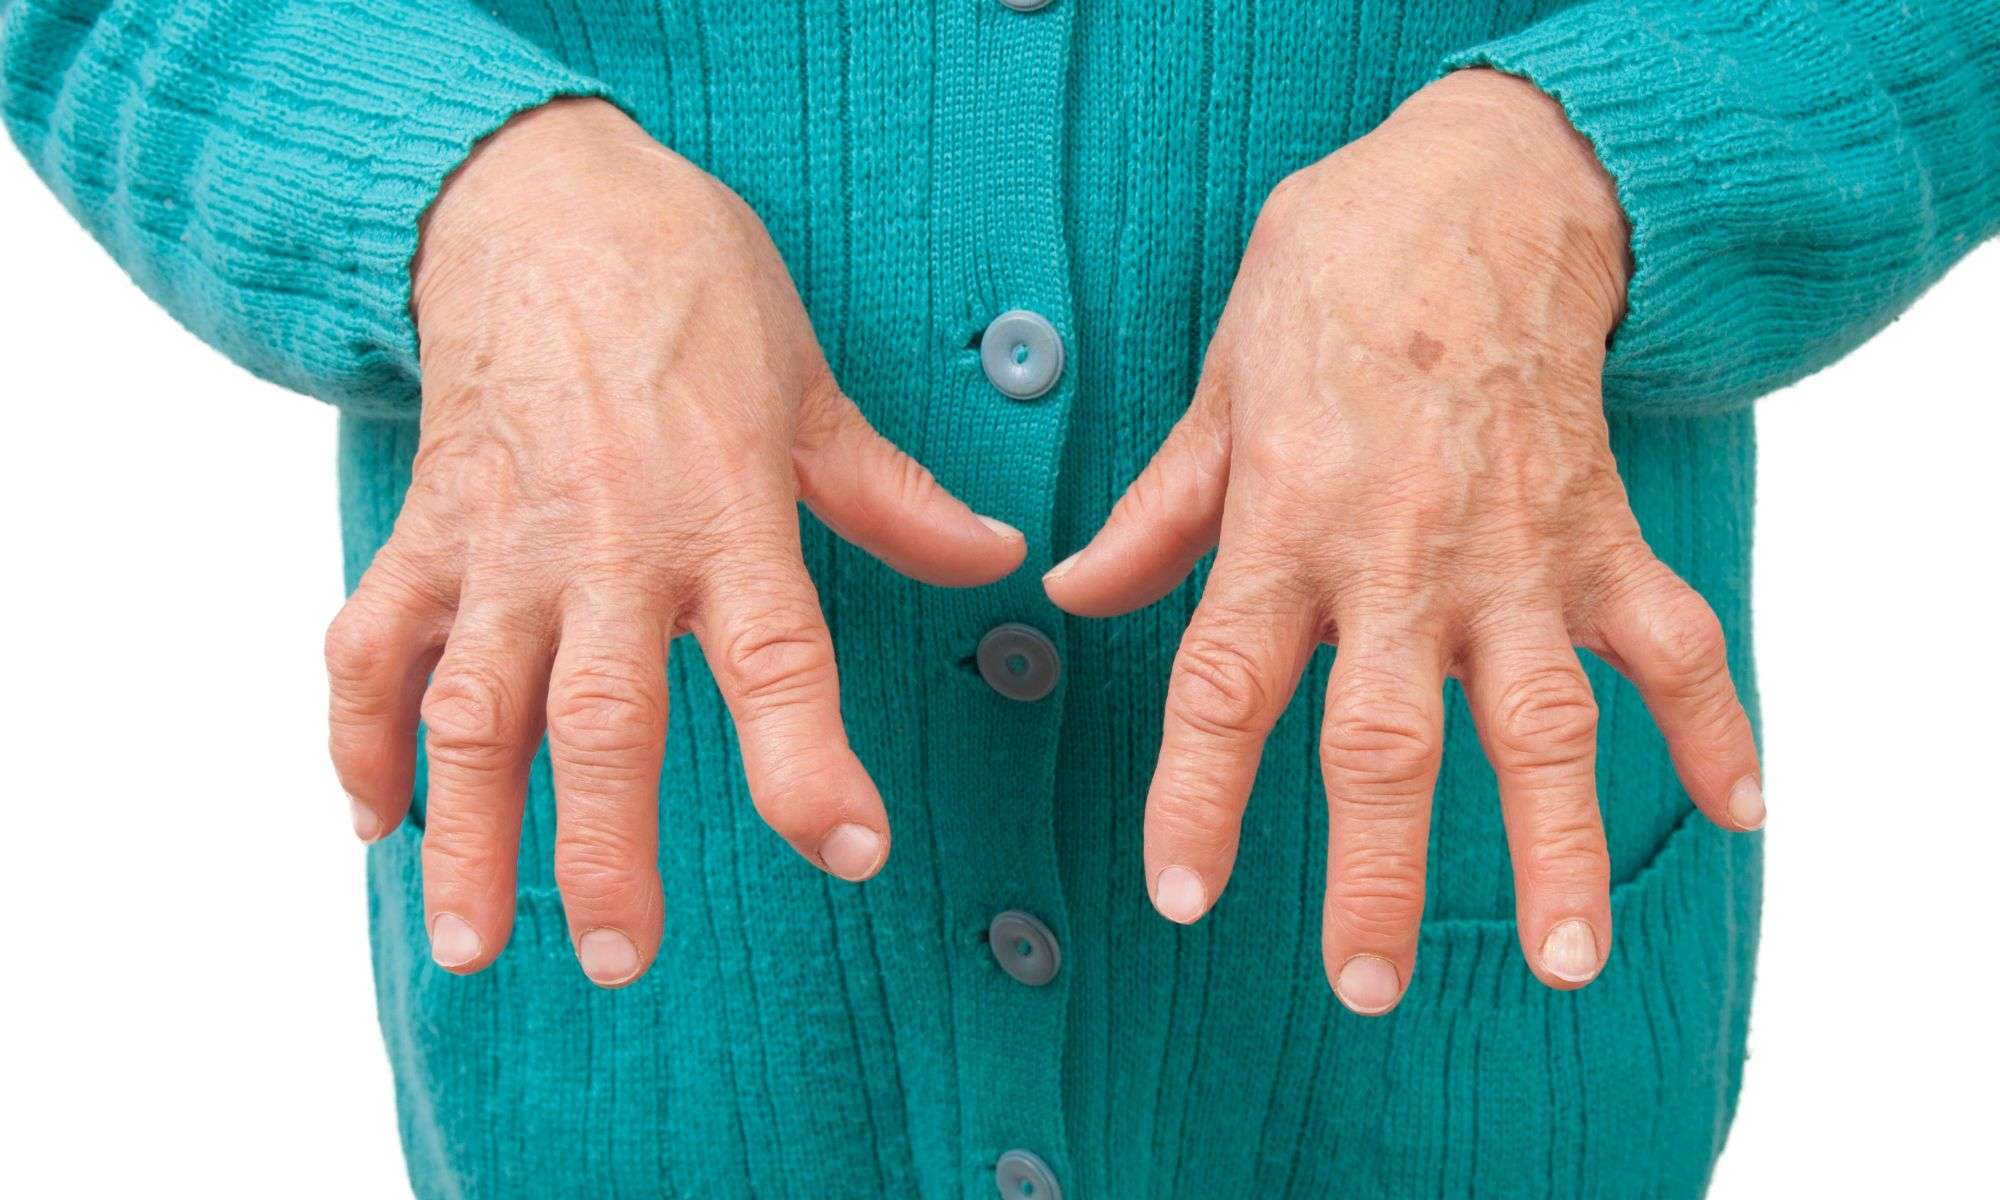 A close-up image of an elderly person's hands, fingers curved and gnarled from arthritis, yet exhibiting a sense of relaxation and ease. The hands are positioned as if typing or writing, symbolizing the act of leaving a positive review for the relief provided by CBD